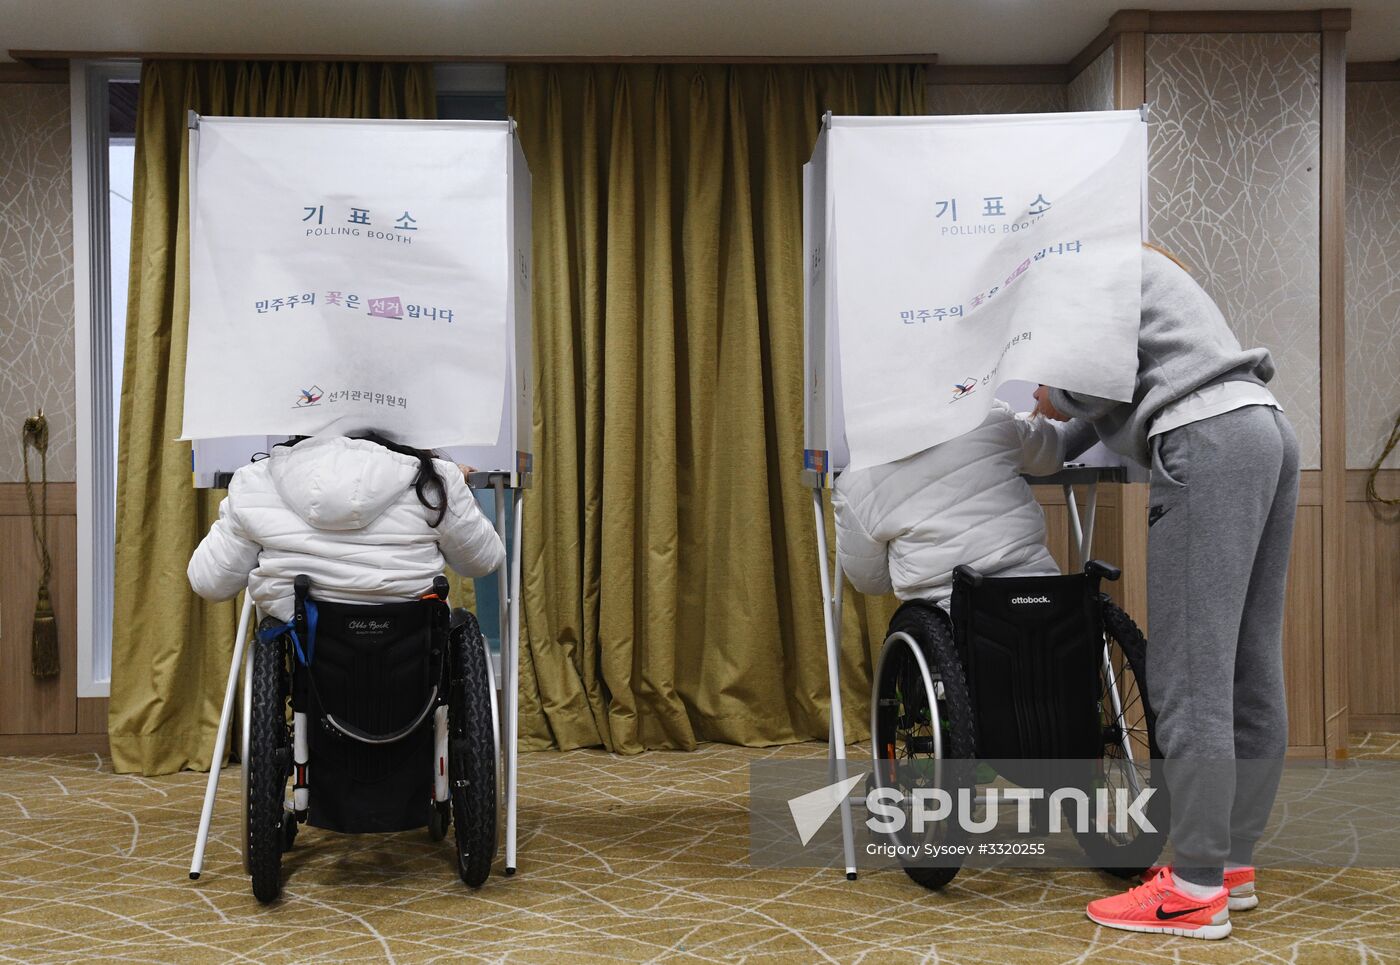 Early voting for 2018 Russian presidential election in Pyeongchang